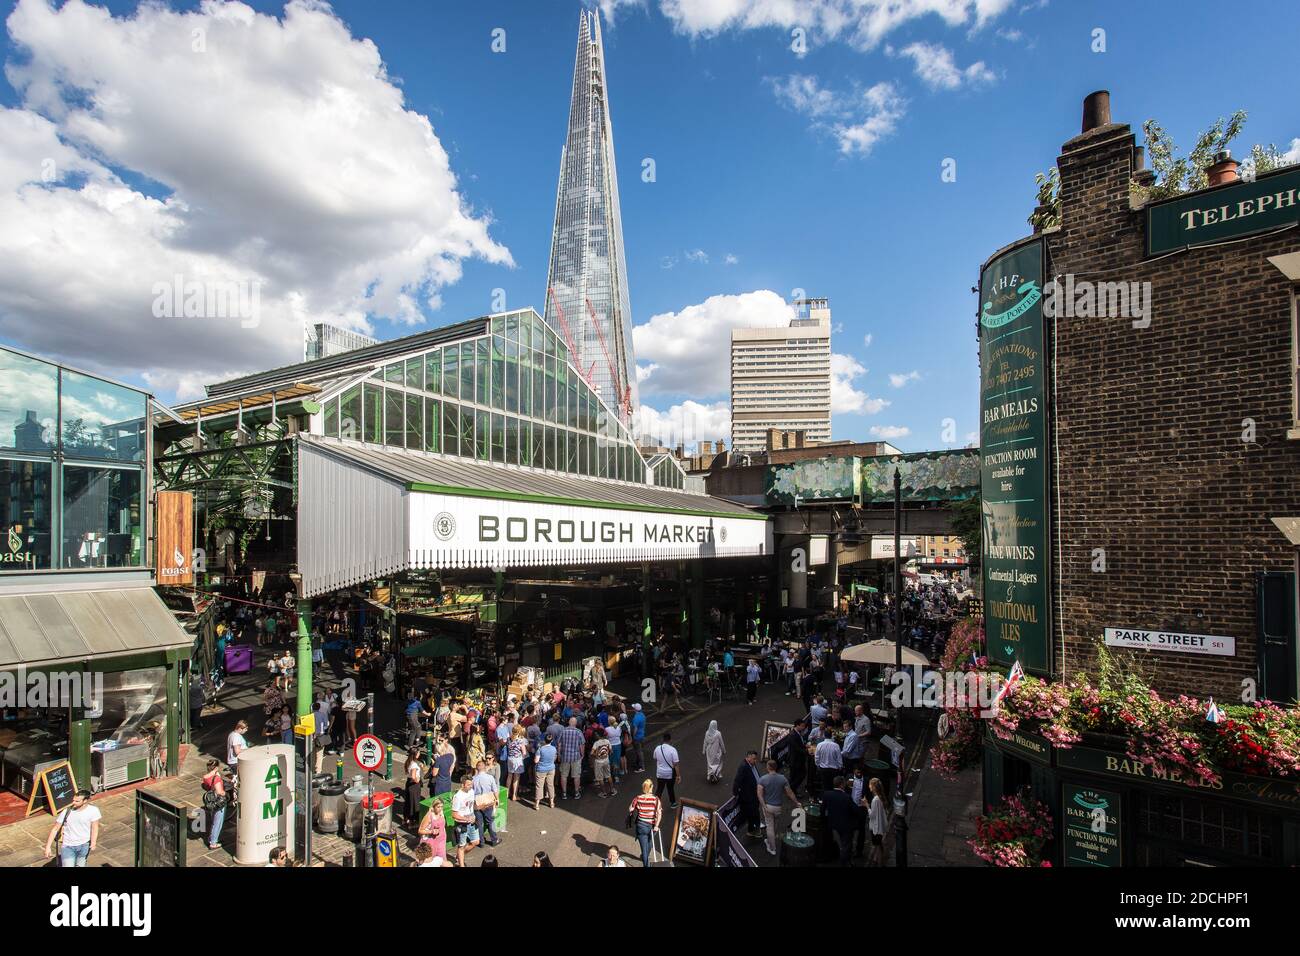 Borough Market, near London Bridge. It is one of the largest and oldest food markets in London. Stock Photo